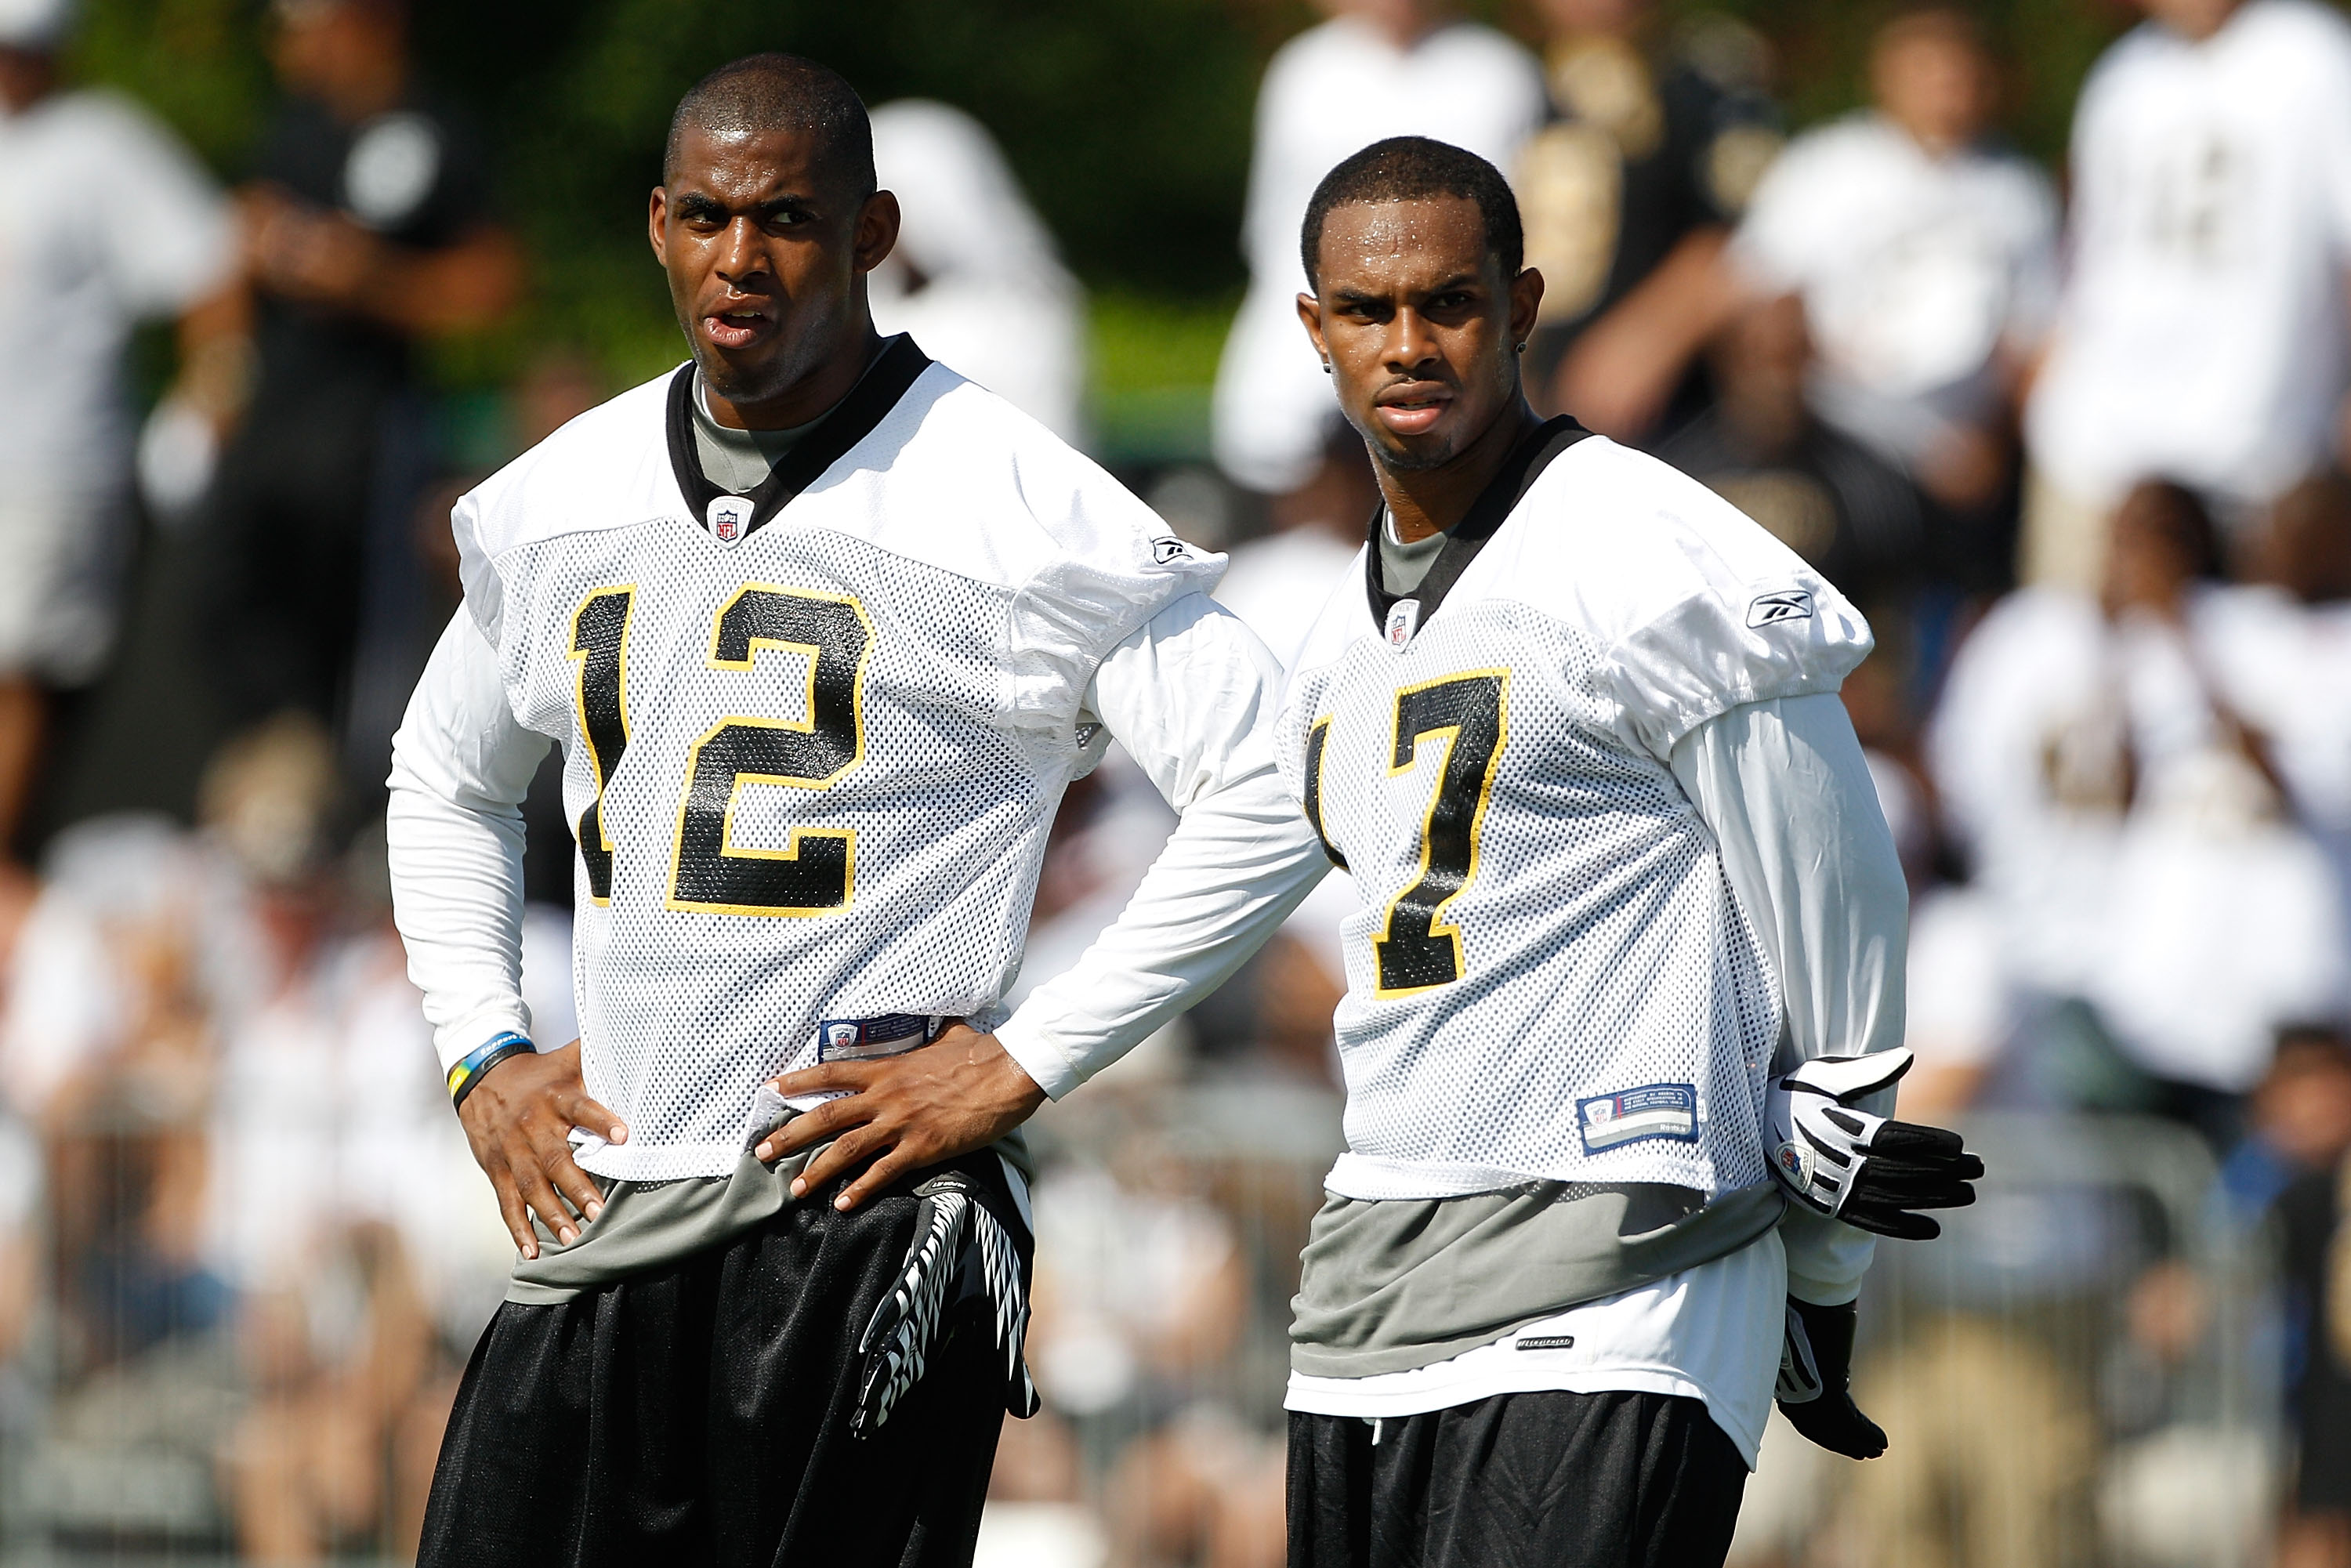 METAIRIE, LA - JULY 30:  Marques Colston#12 and Robert Meachem #17 of the New Orleans Saints during training camp on July 30, 2010 in Metairie, Louisiana.  (Photo by Chris Graythen/Getty Images)